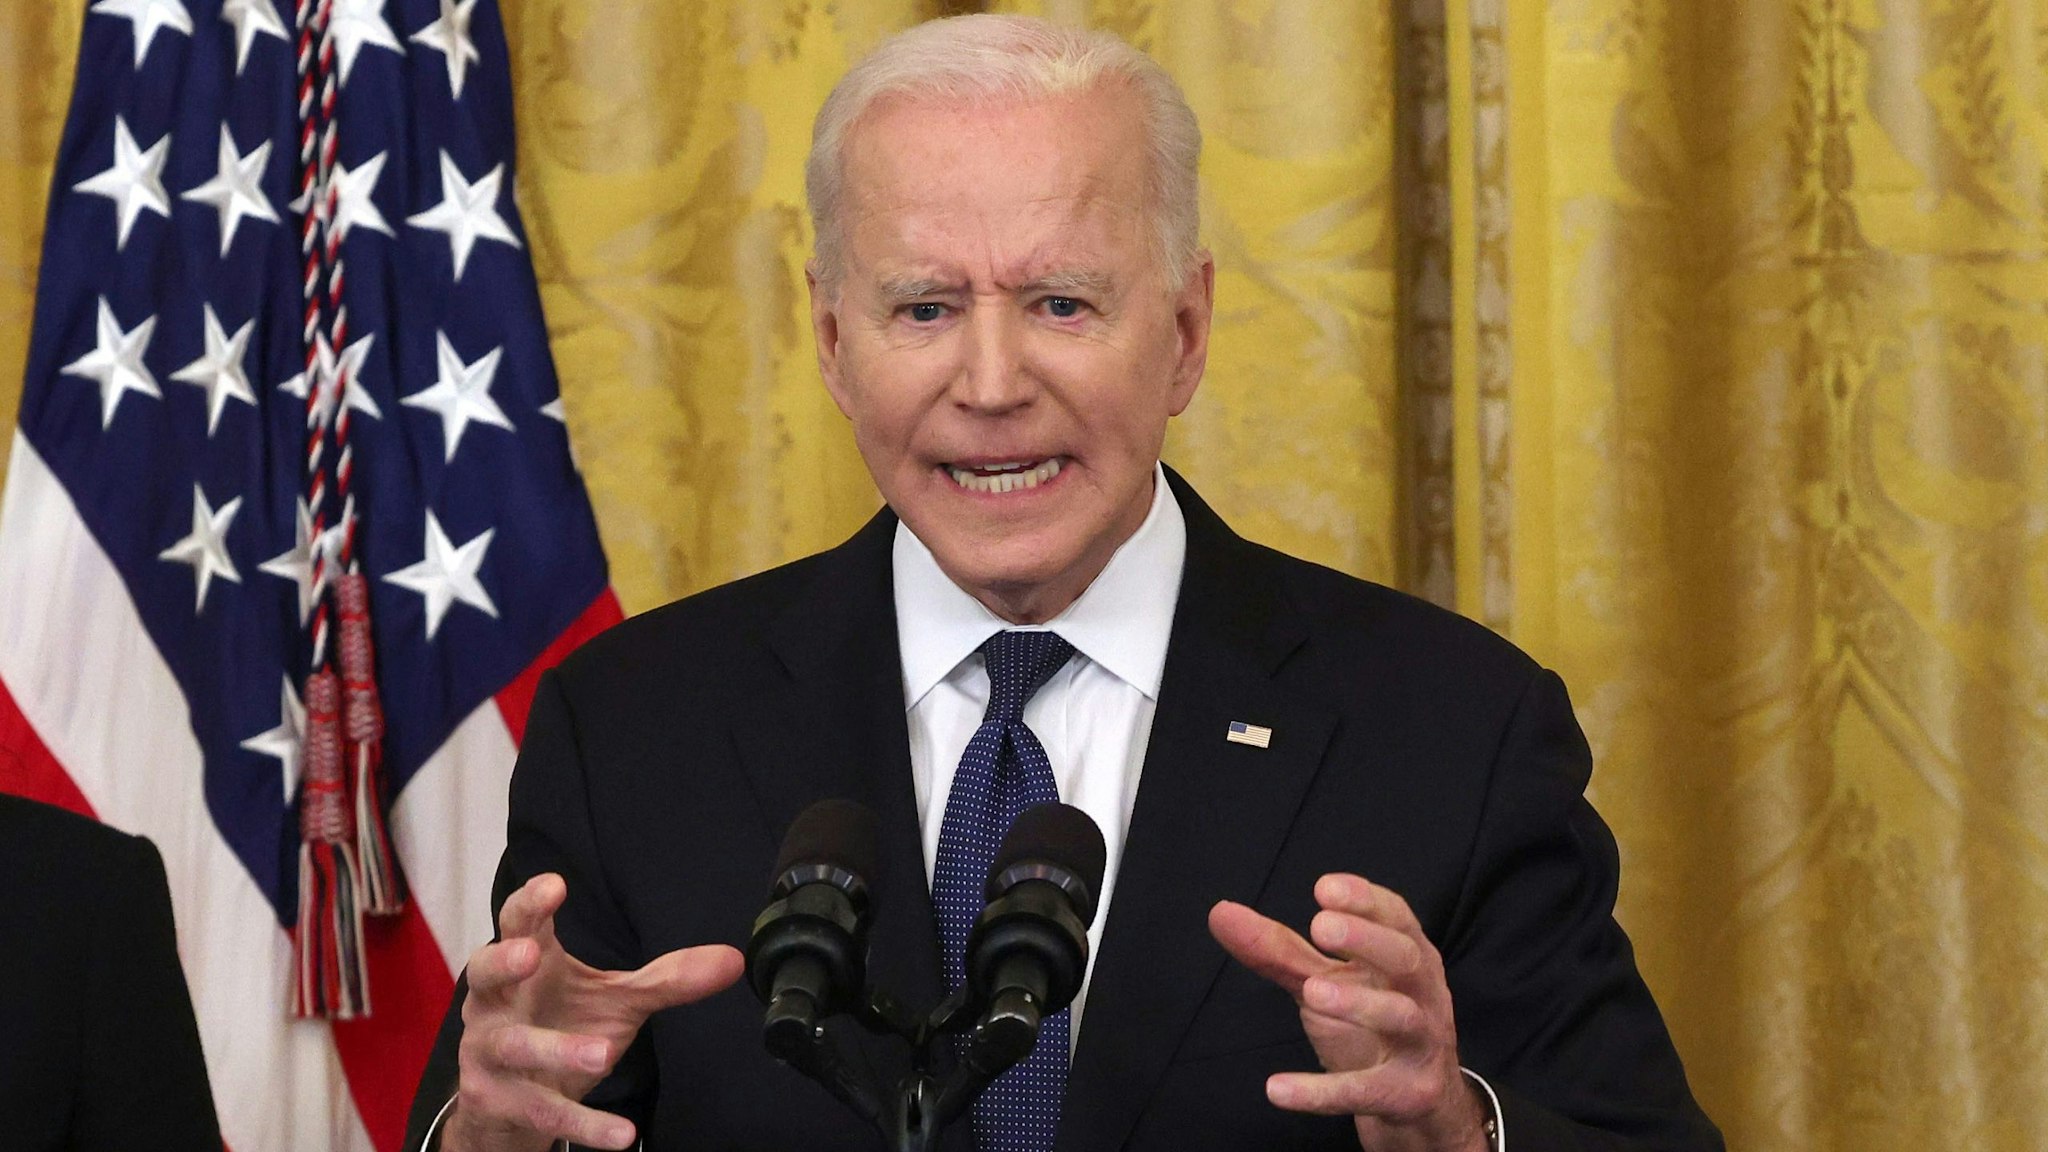 WASHINGTON, DC - MAY 20: U.S. President Joe Biden gestures as he delivers remarks, before a signing ceremony for the COVID-19 Hate Crimes Act in the East Room of the White House on May 20, 2021 in Washington, DC.  The legislation, drafted in response to the increased violence against the Asian American and Pacific Islander (AAPI) community during the Coronavirus pandemic, will create a new position in the Department of Justice to focus on the rise in hate crimes and provide resources to federal, state, and local jurisdictions to better report cases.